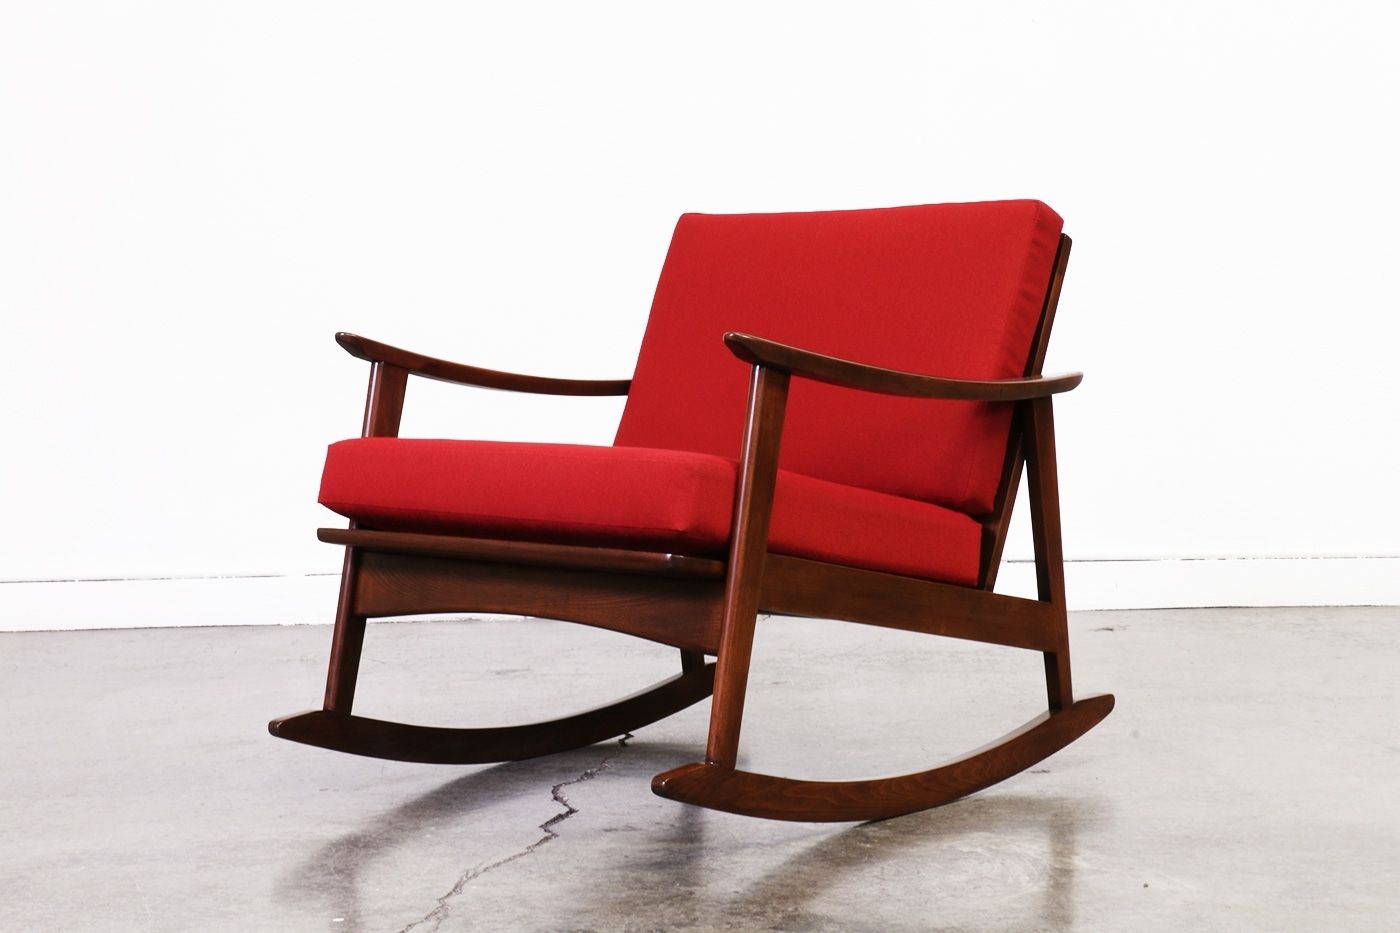 Famous Mid Century Modern Rocking Chair Vintage Supply Store Hans Wegner Throughout Vintage Outdoor Rocking Chairs (View 10 of 15)